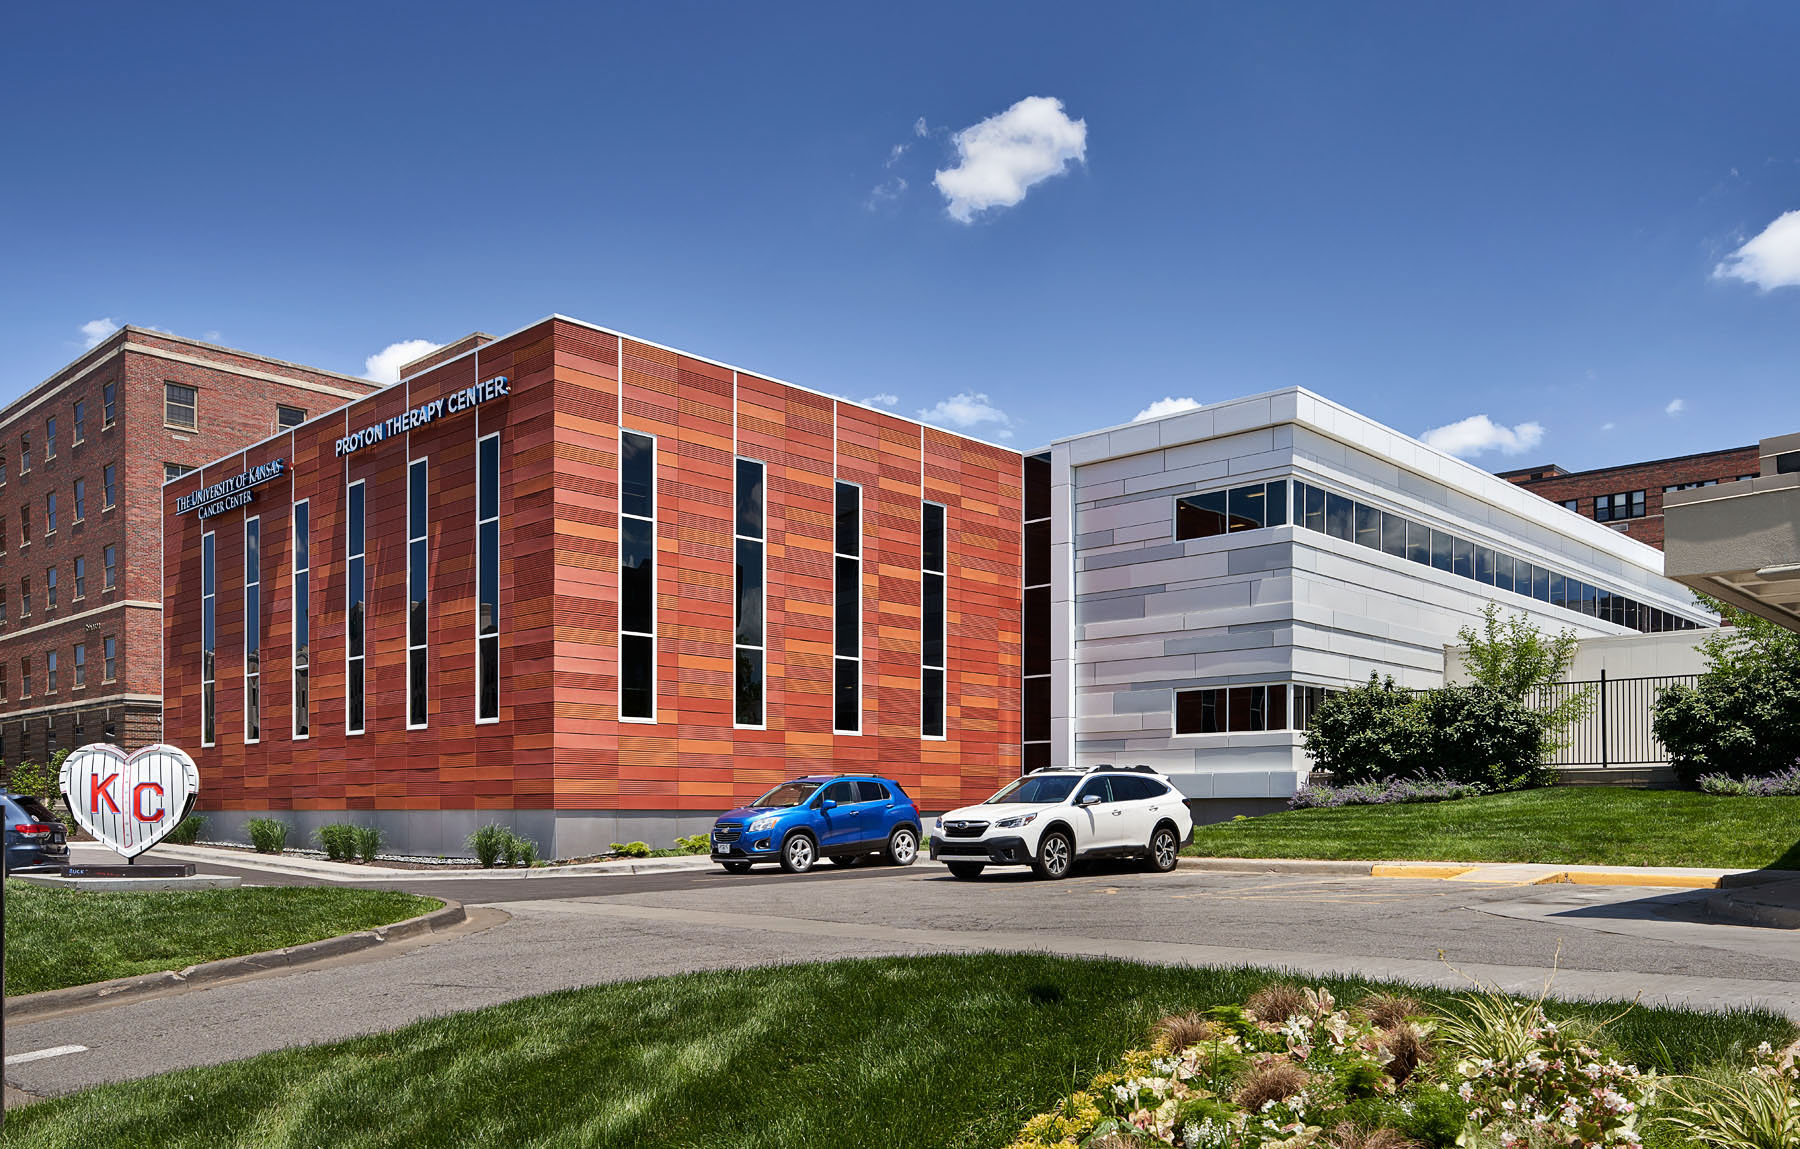 TUKHS Proton Therapy built by McCownGordon Construction